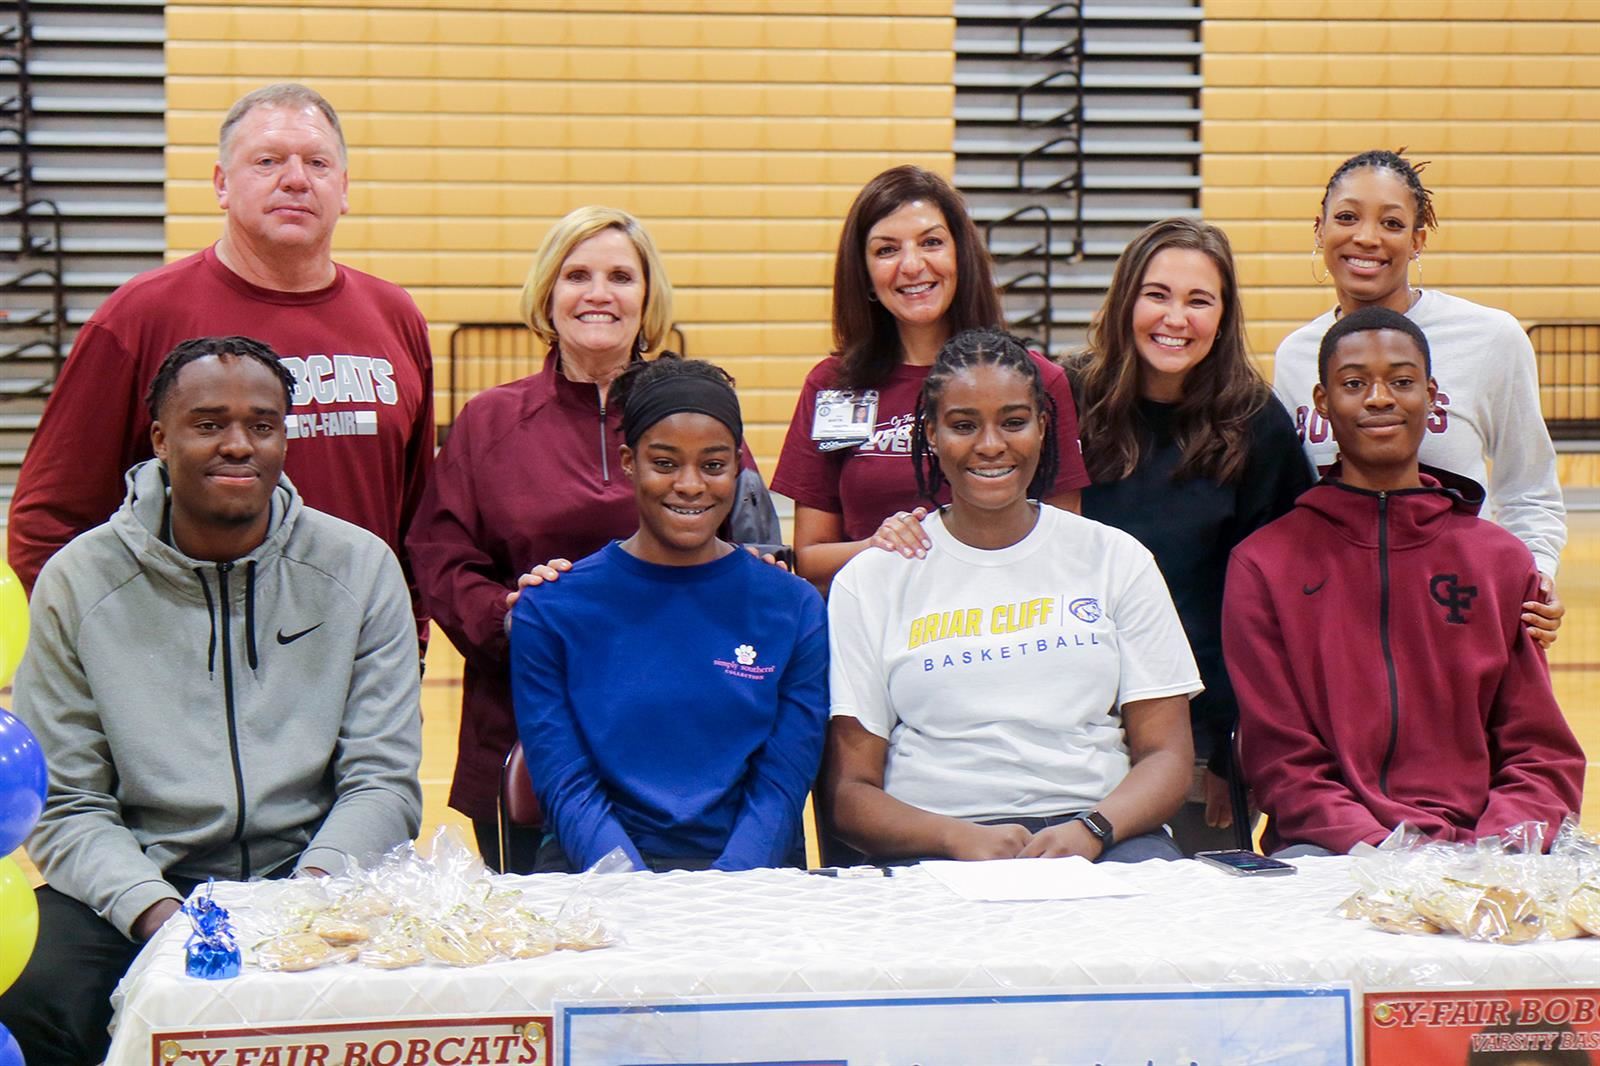 Cy-Fair High School senior Naomi Aigberadion, center second from right, signed a letter of intent to play basketball.